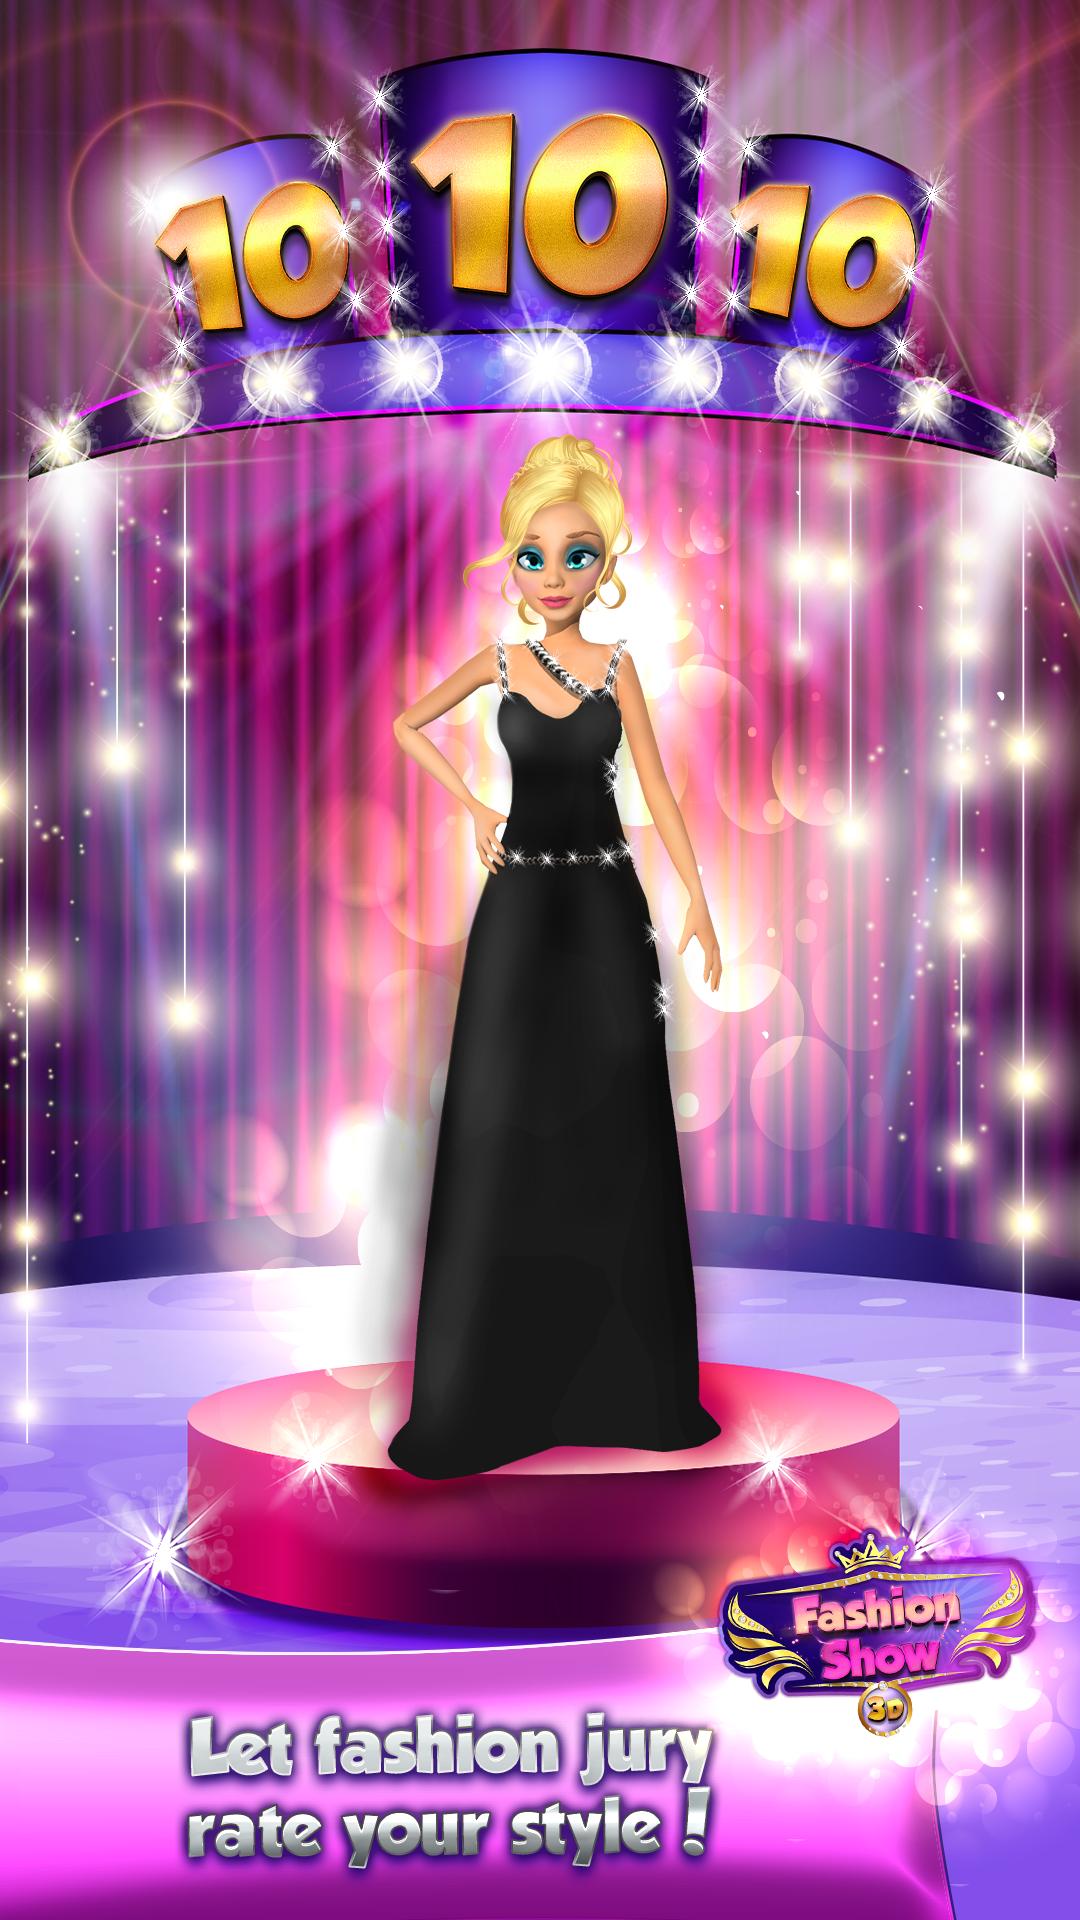 Model Dress up 3D - Fashion Show Game for Android - APK Download